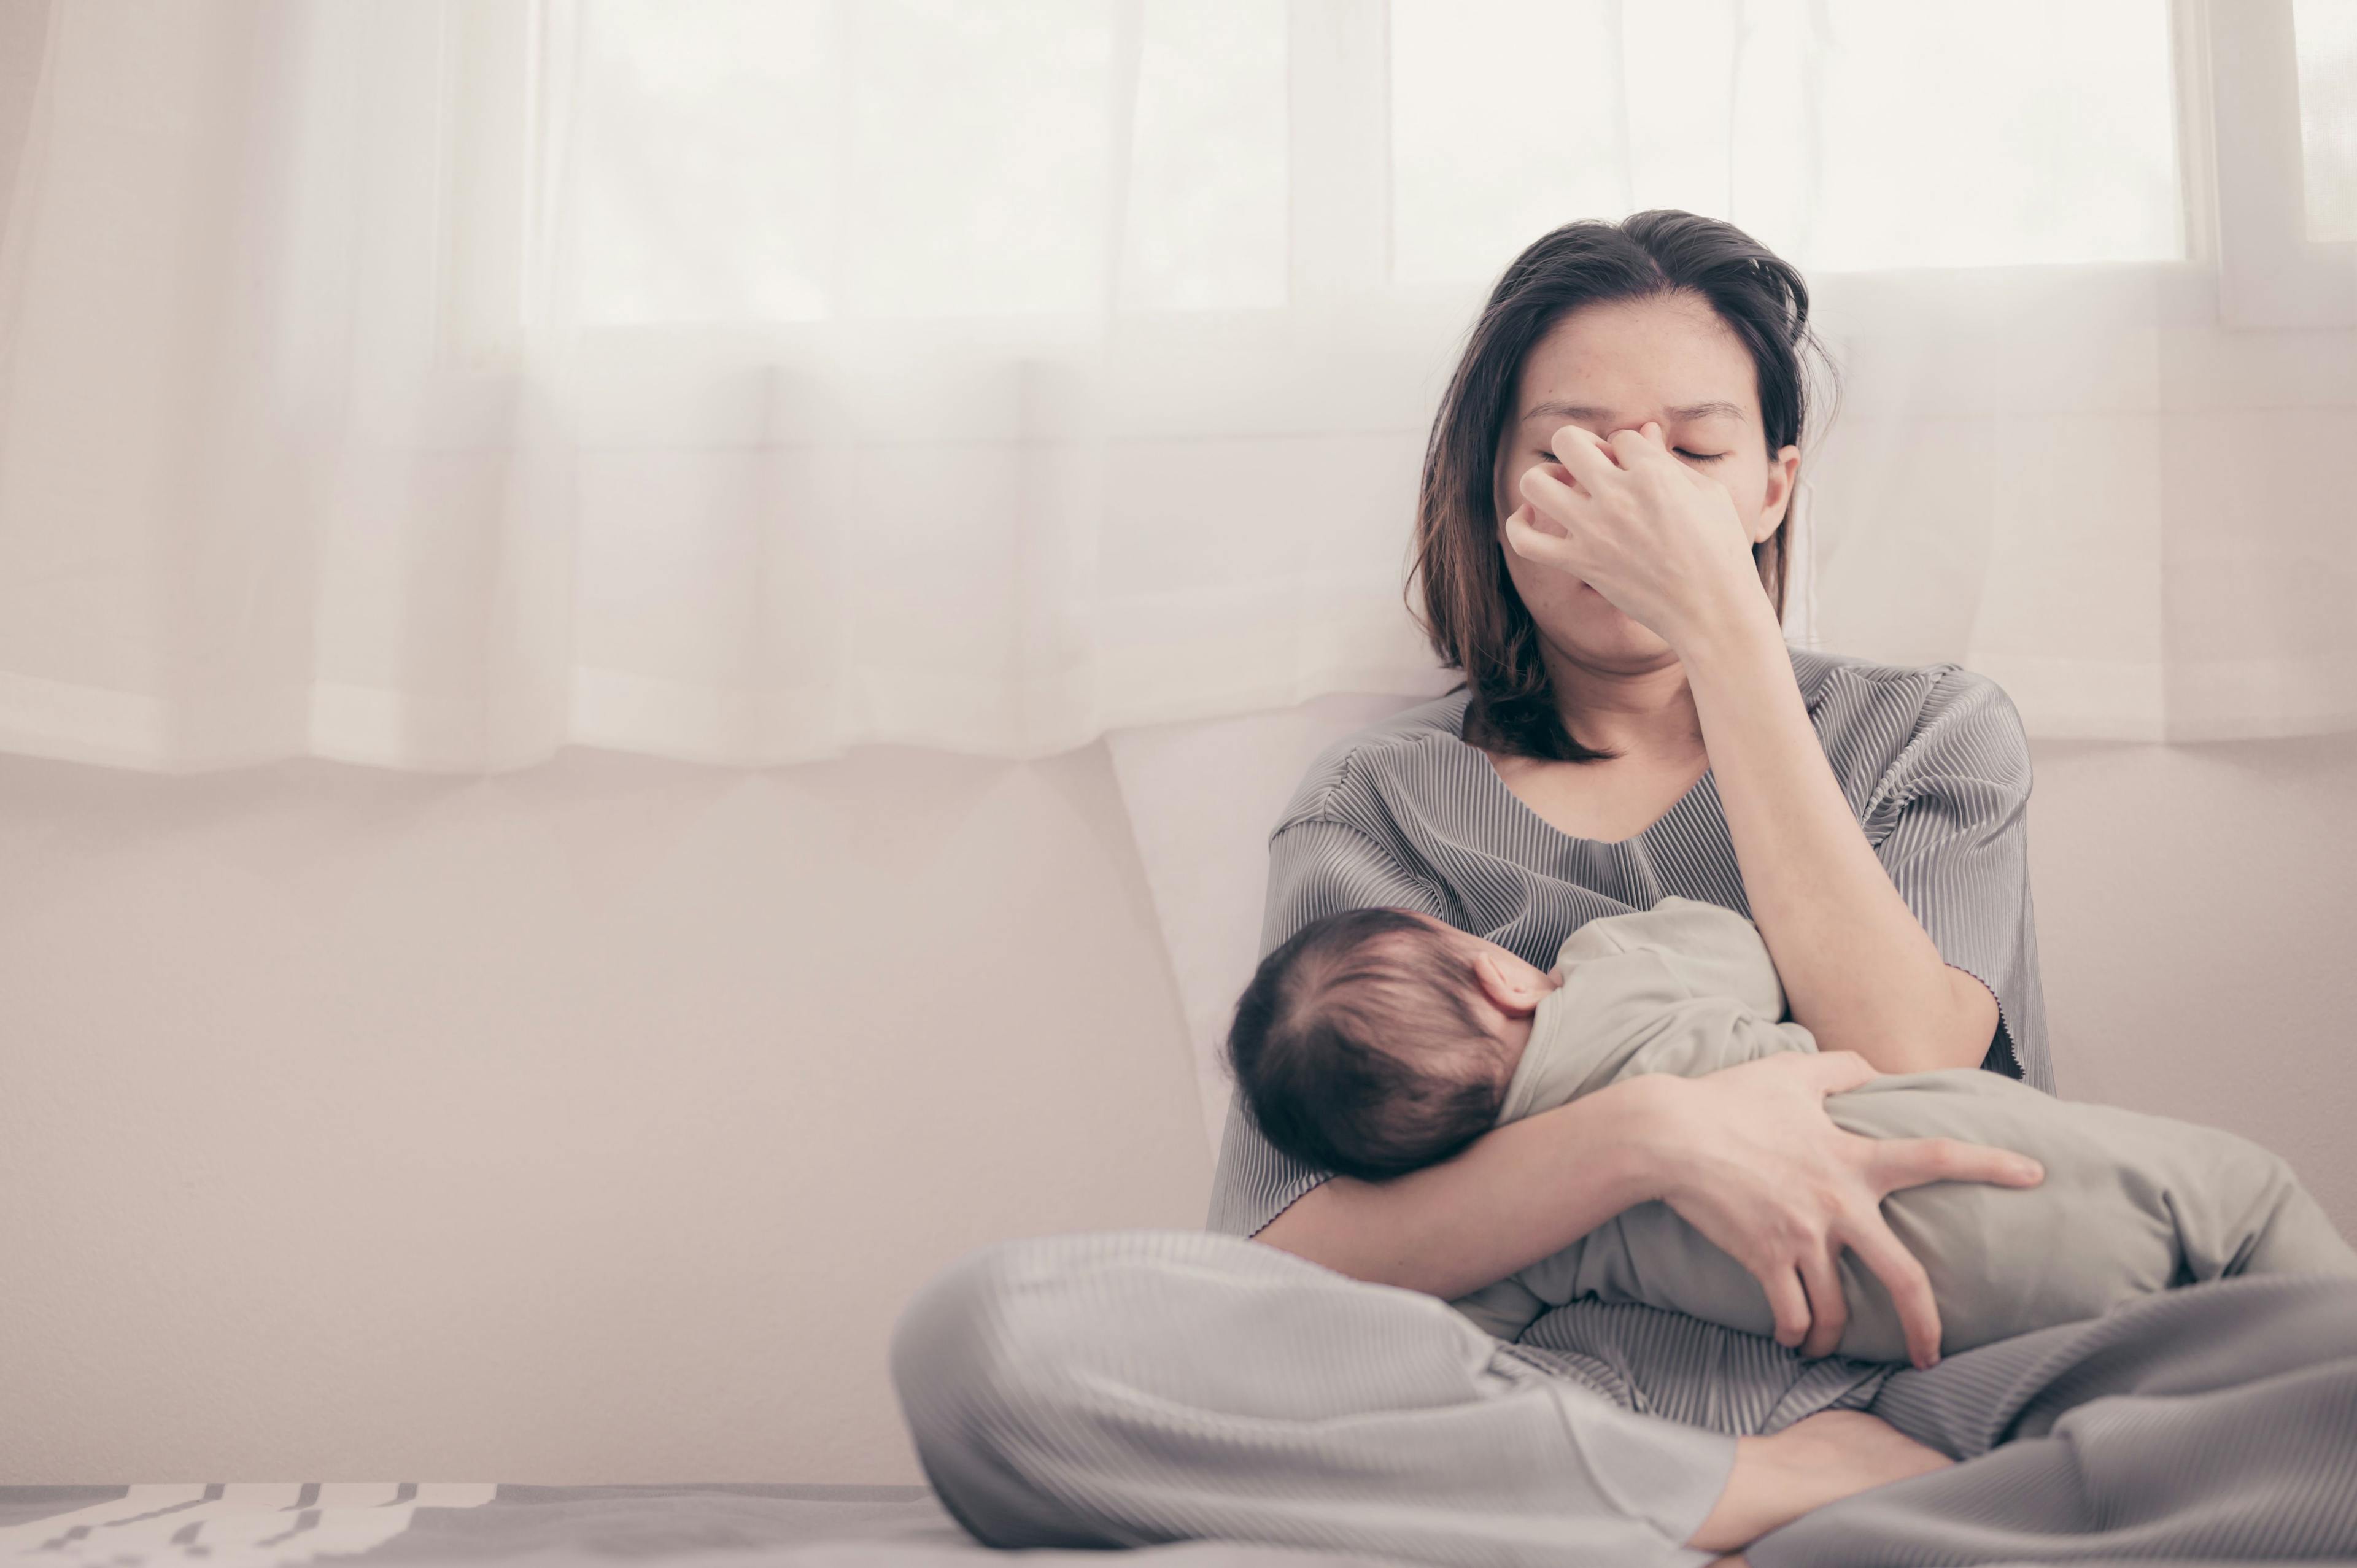 Tired Mother Suffering from experiencing postnatal depression.Health care single mom motherhood stressful - Image credit: grooveriderz | stock.adobe.com